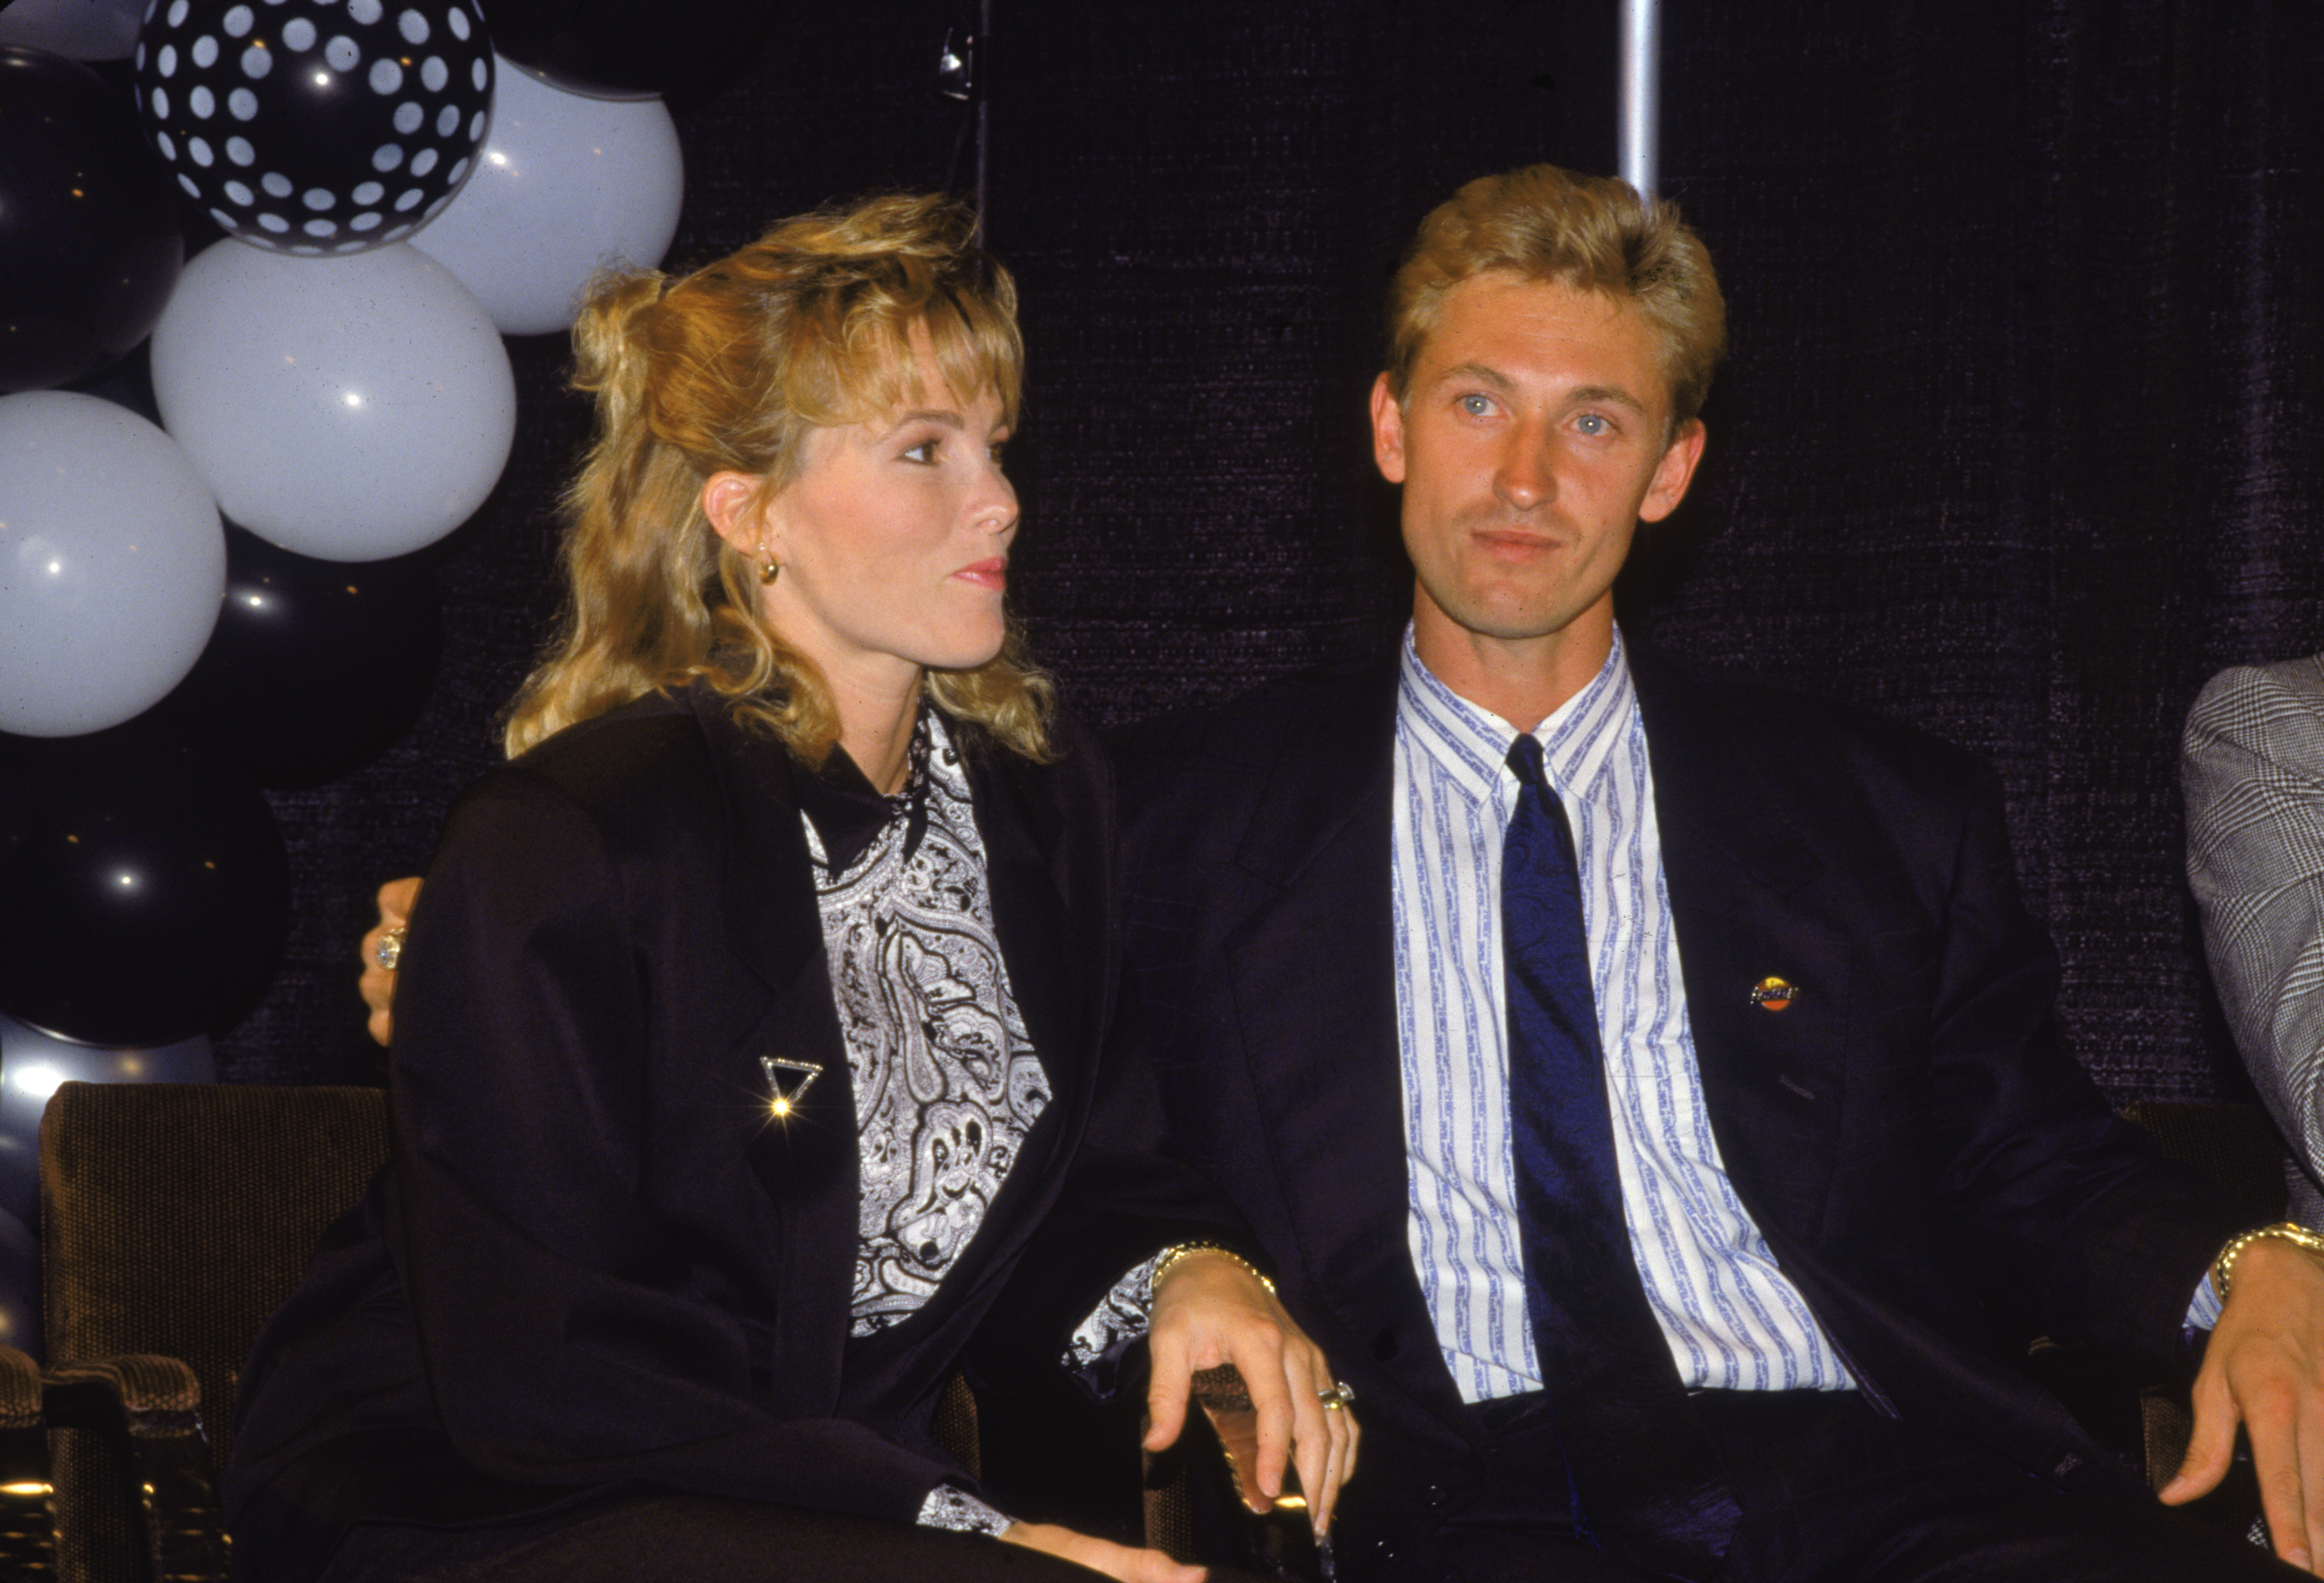 Wayne Gretzky is traded from the Edmonton Oilers to the Los Angeles Kings  in 1988 – New York Daily News